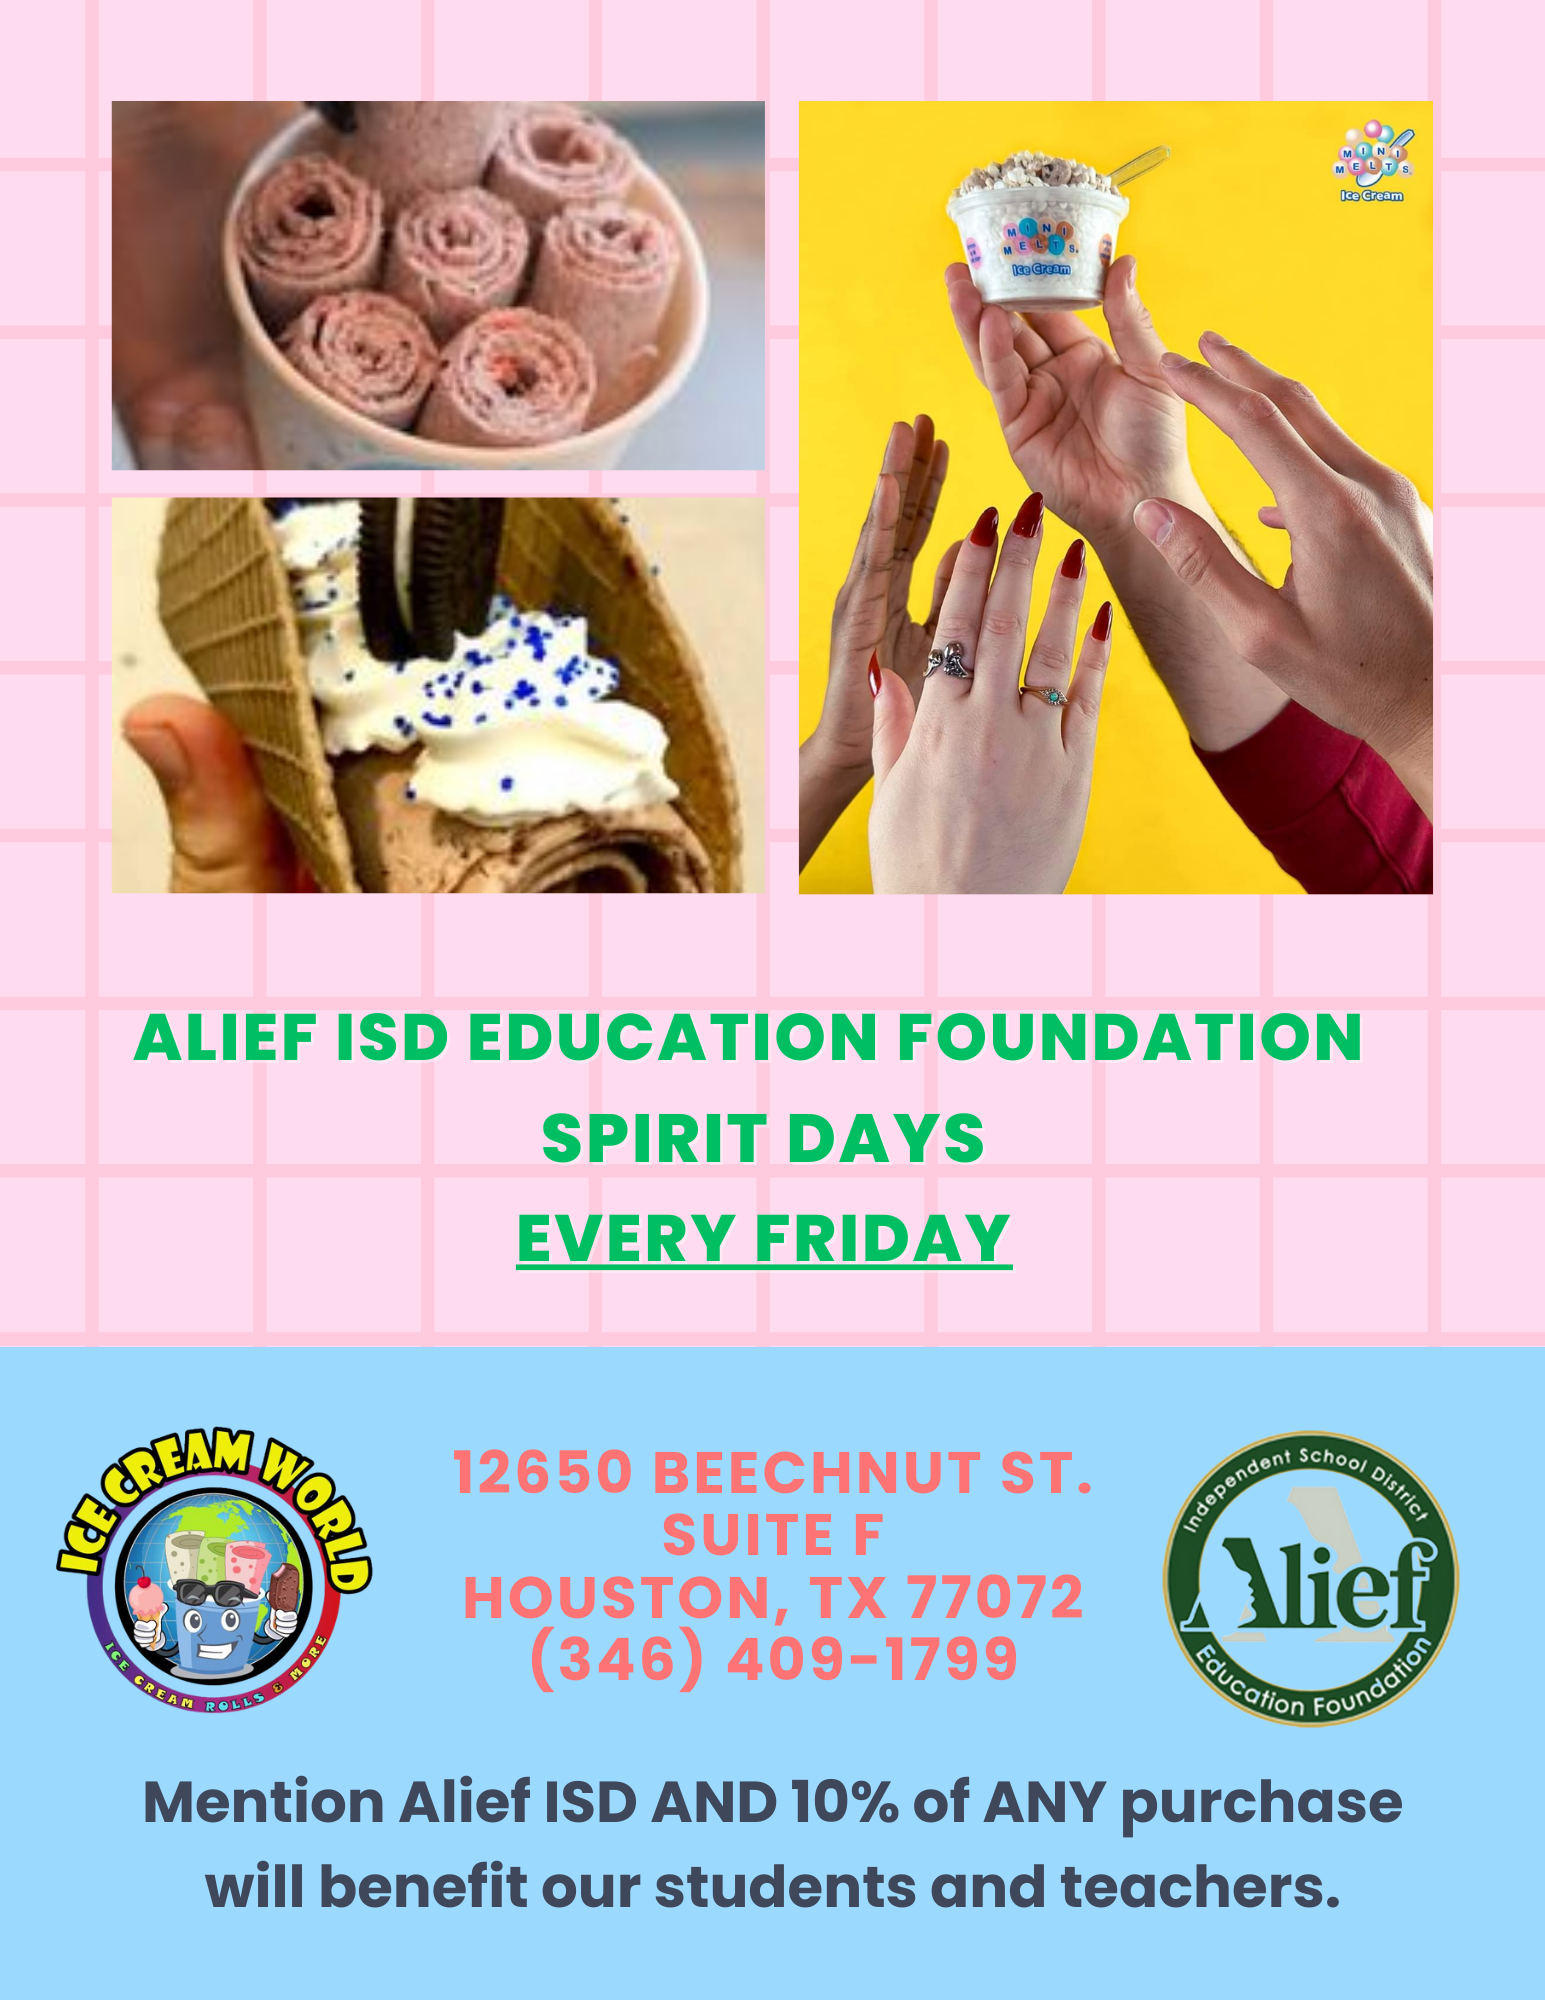 Alief ISD Education Foundation Spirit Days Every Friday: 12650 Beechnut St. Suite F Houston TX 77072 (346)4091799, Mention Alief ISD and 10% of ANY purchase will benefit our students and teachers. 